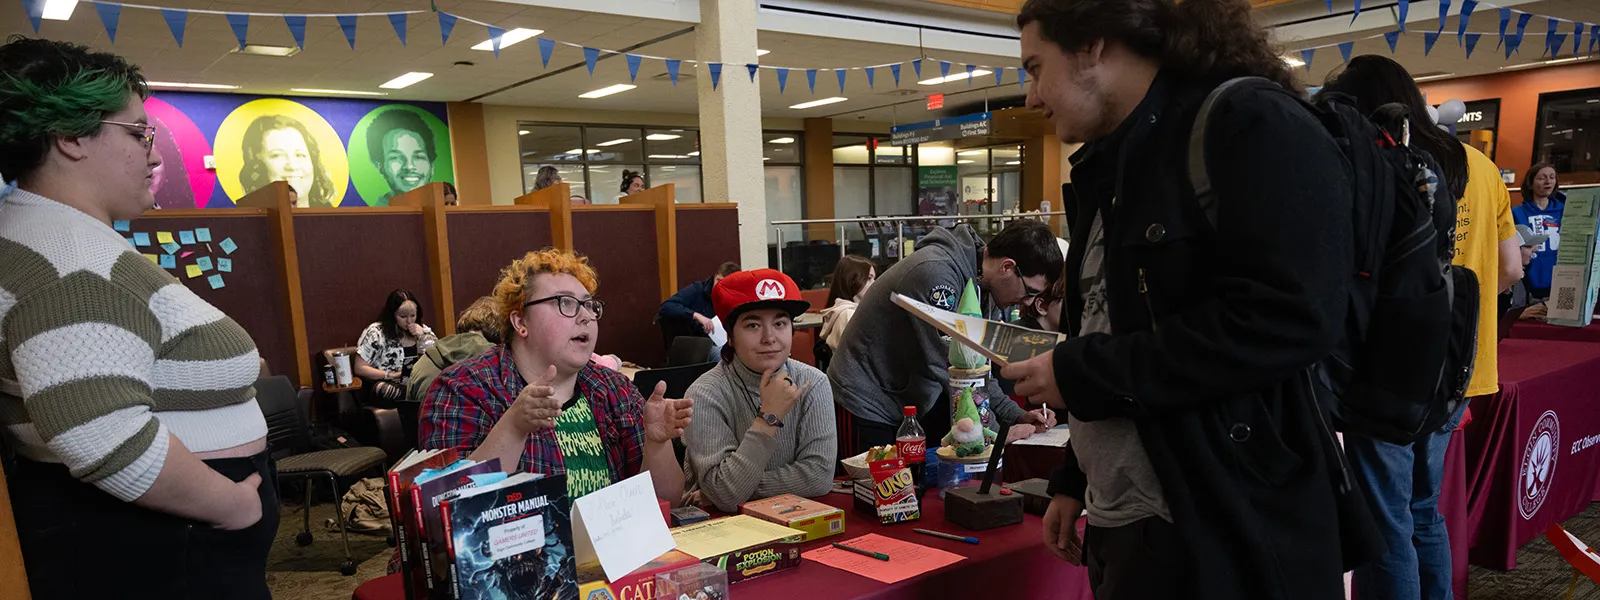 Students at the Gamers United club table